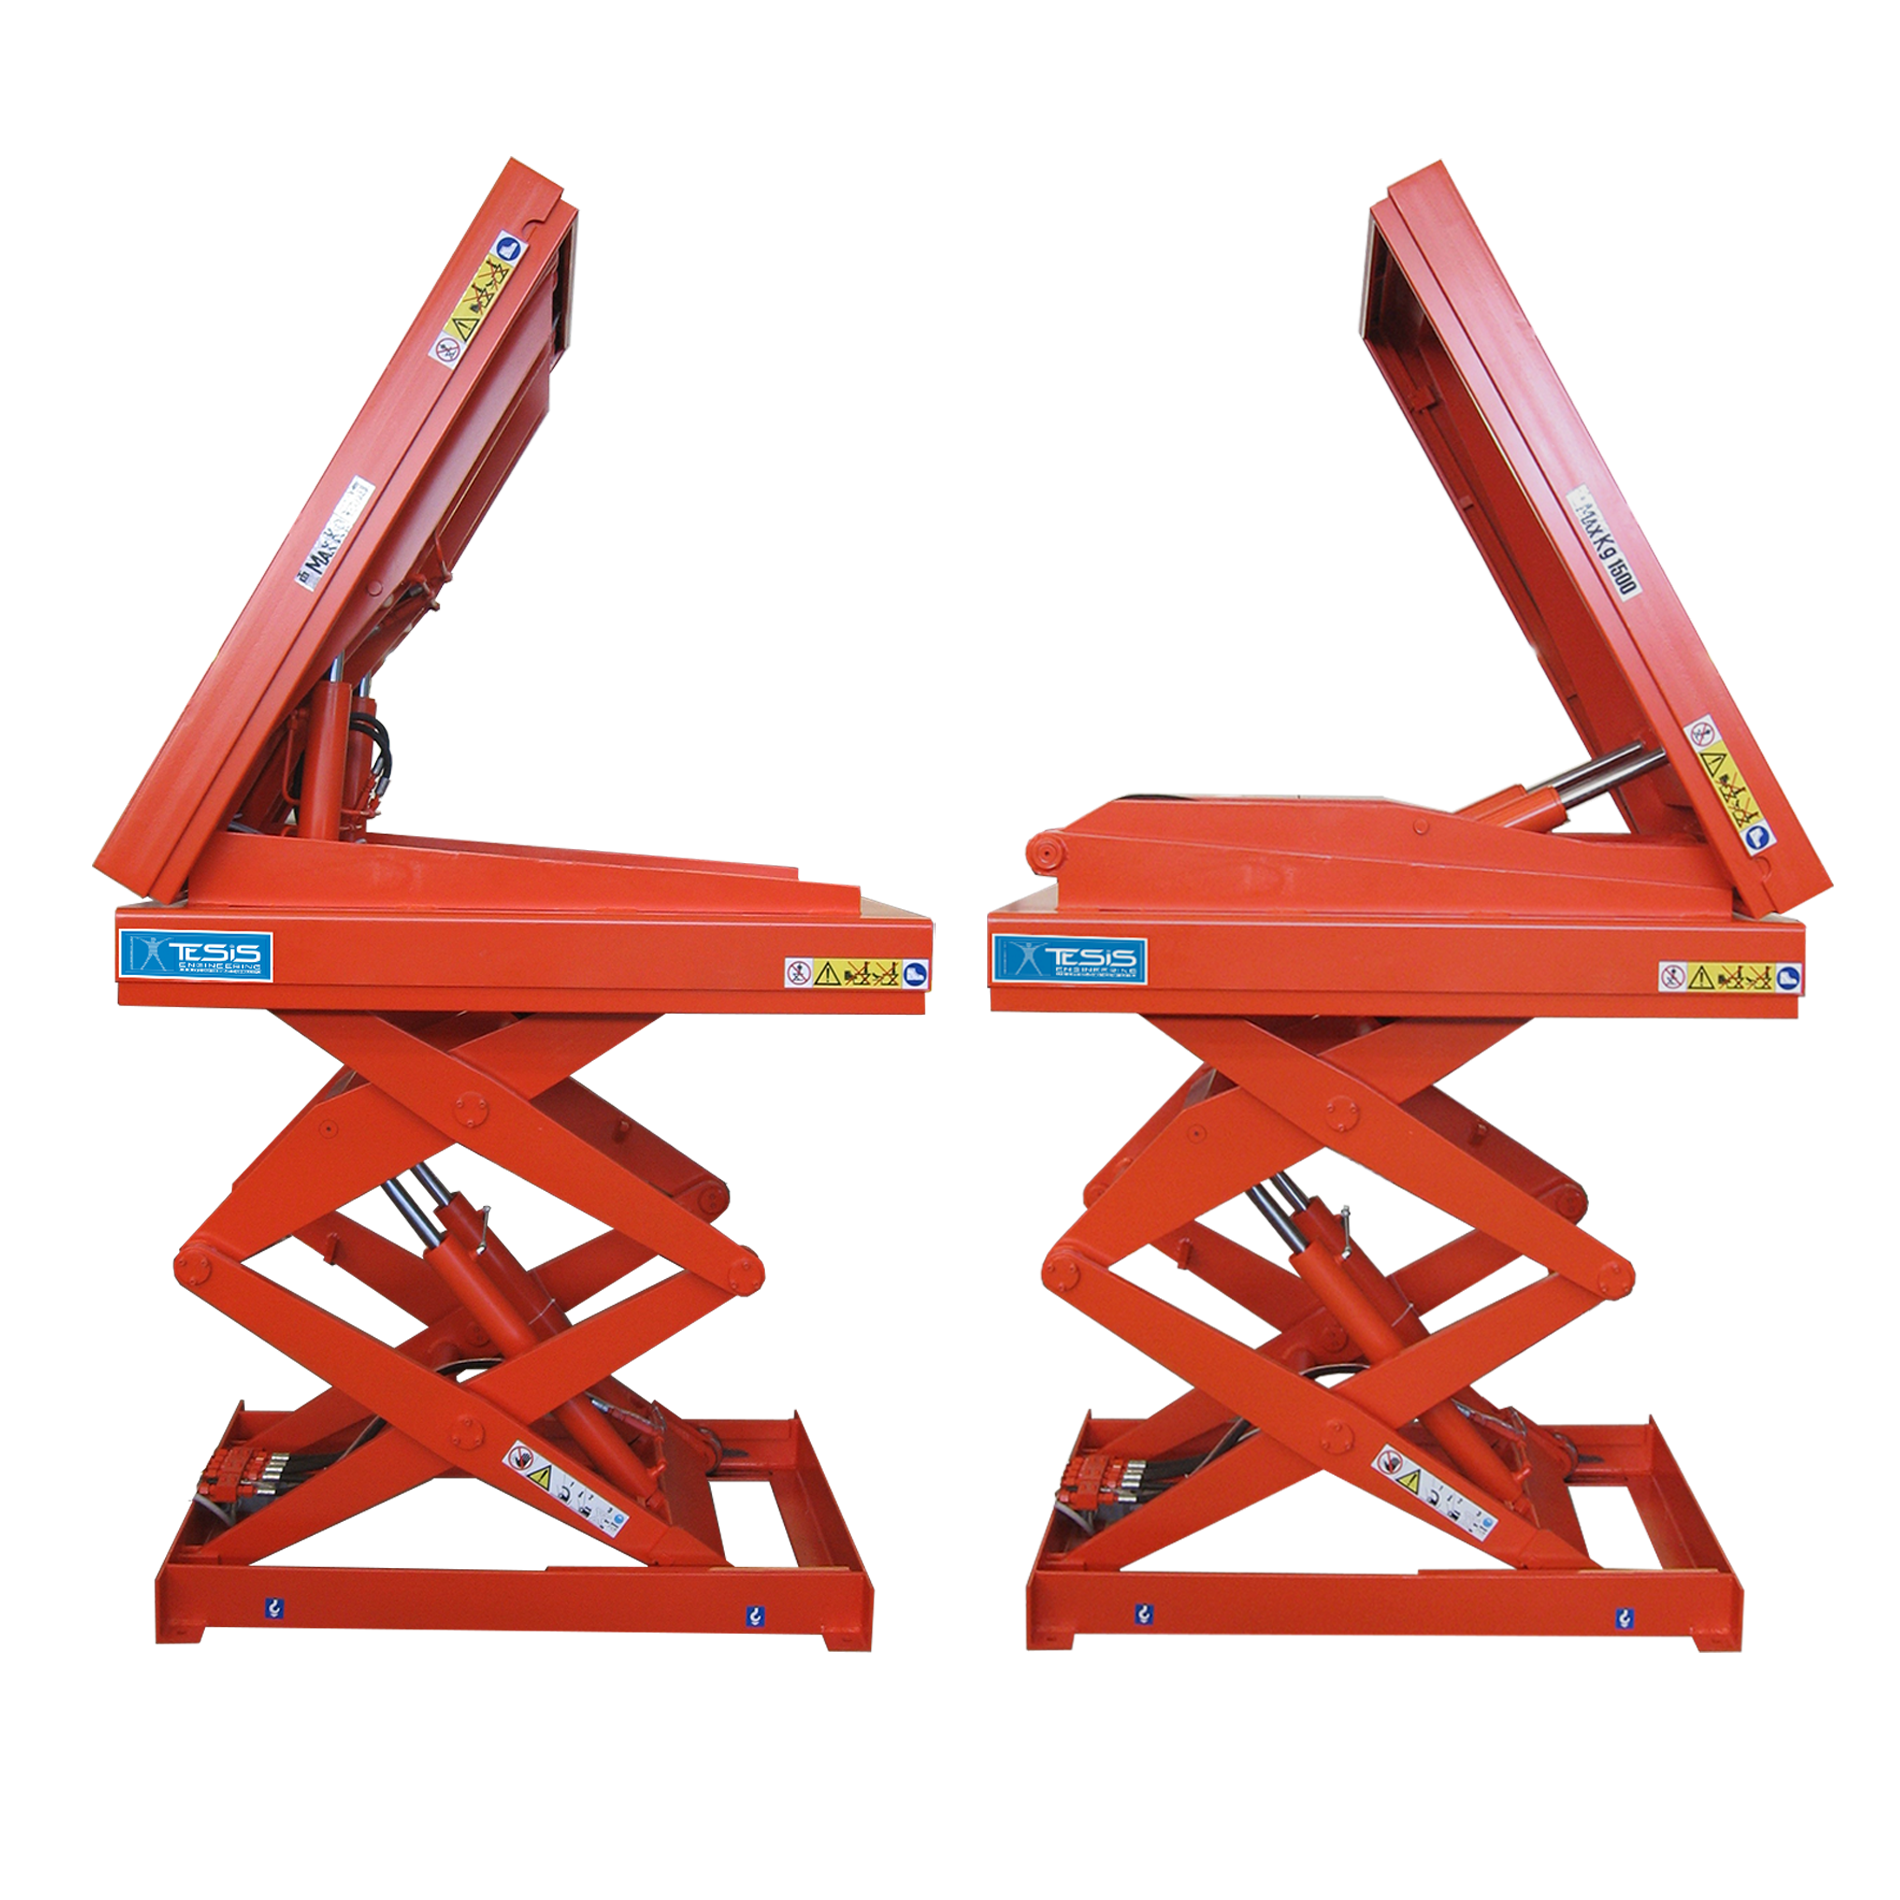 Tilt & lift table with double tilting  platform - tilting scissor lifts - scissor tipper - platform lift with tilting top
